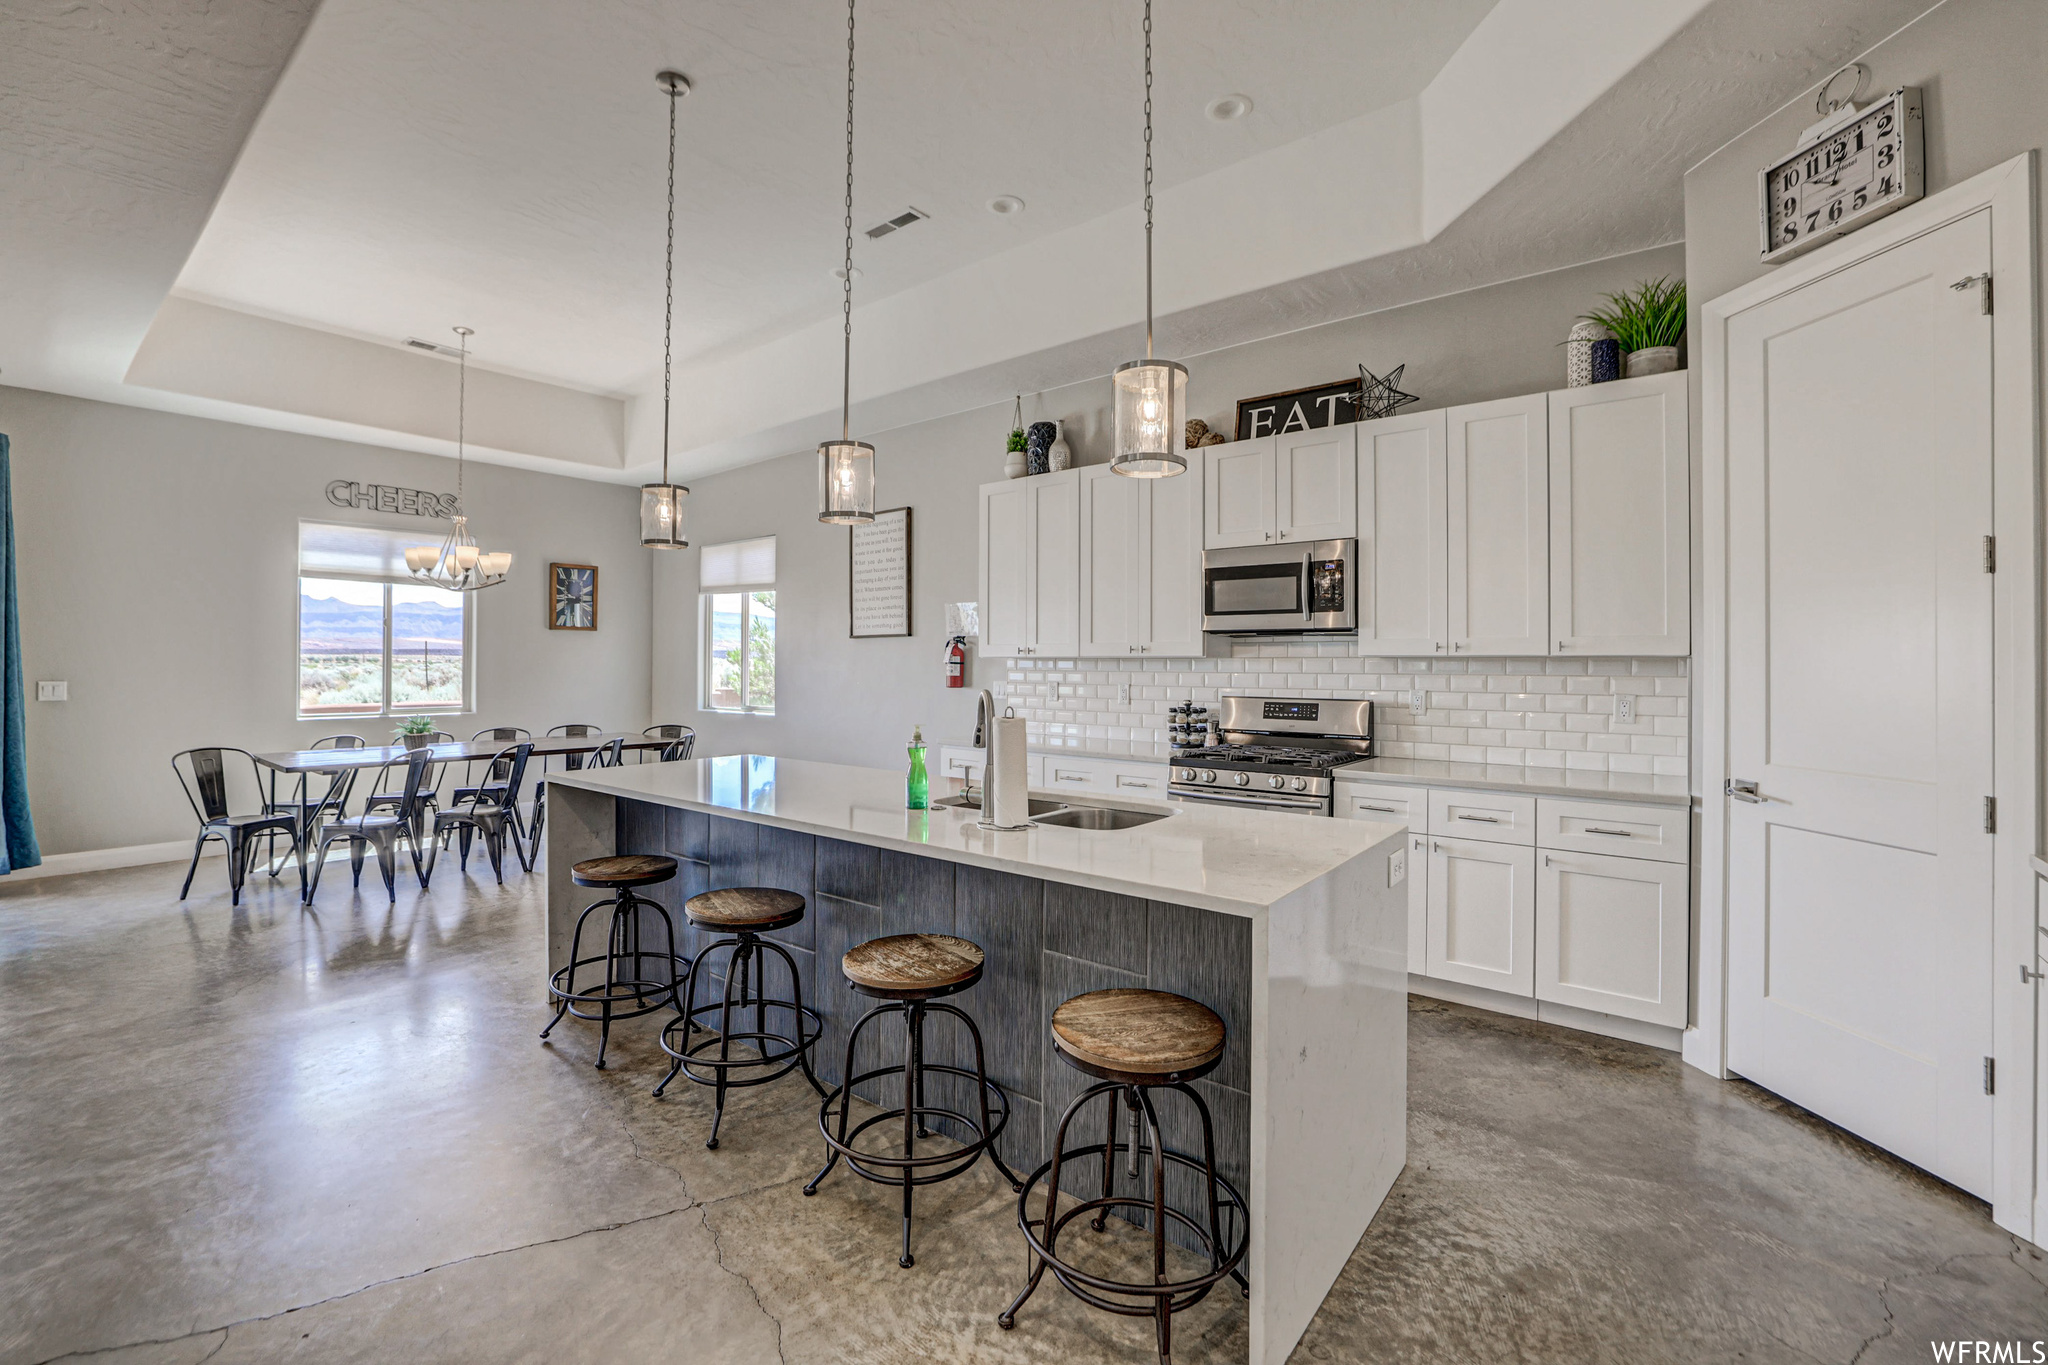 Kitchen with a breakfast bar, natural light, a center island, gas range oven, microwave, light countertops, light tile floors, pendant lighting, and white cabinetry